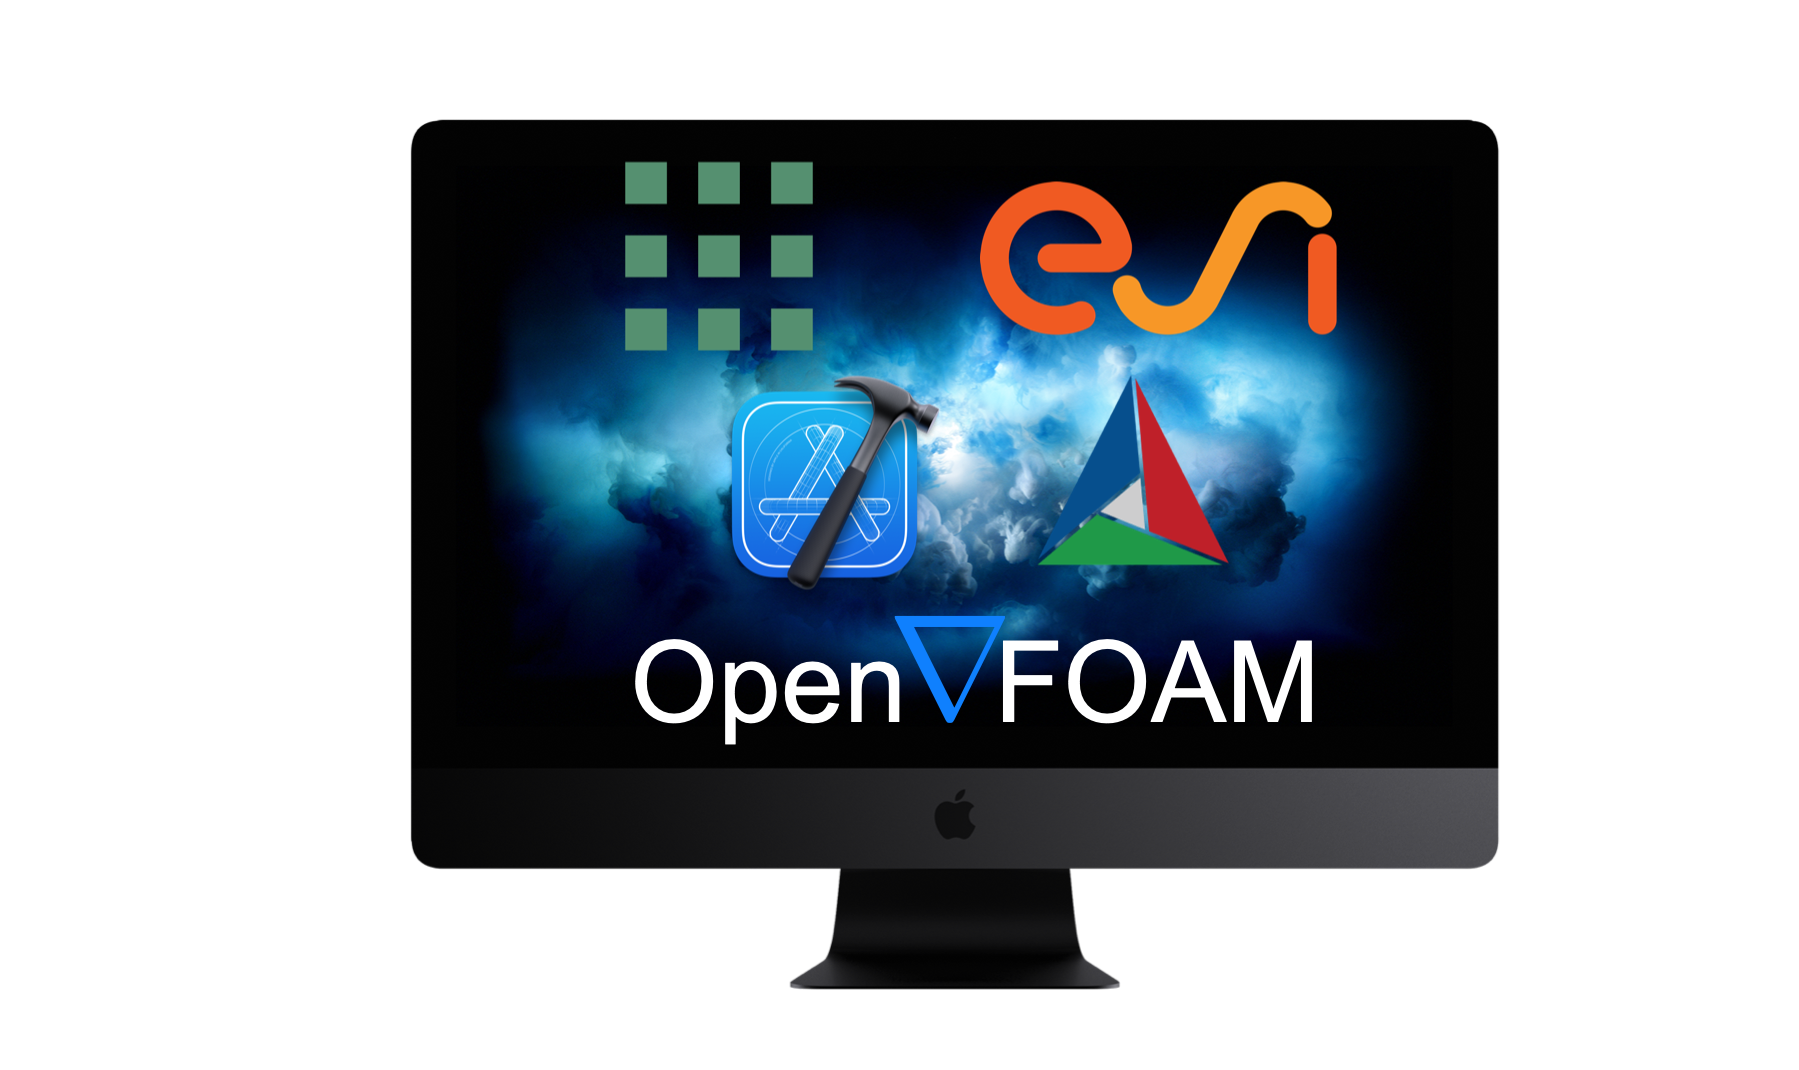 https://raw.githubusercontent.com/zguoch/PubPic/master/blog/MacOS_OpenFOAM_Xcode_Cmake.png